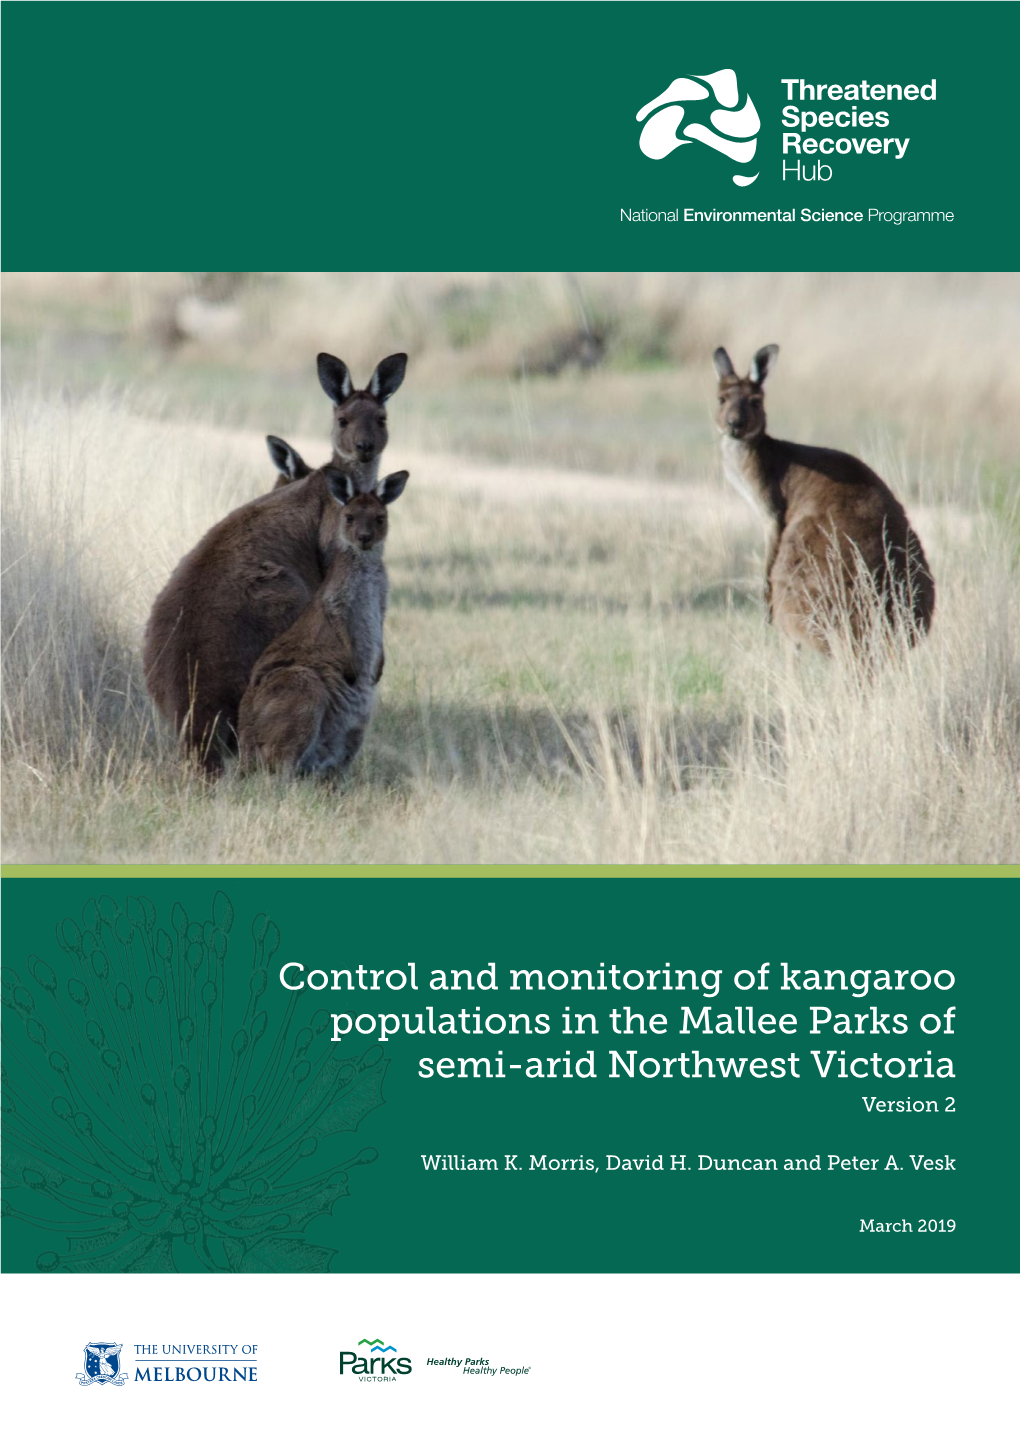 Control and Monitoring of Kangaroo Populations in the Mallee Parks of Semi-Arid Northwest Victoria Version 2